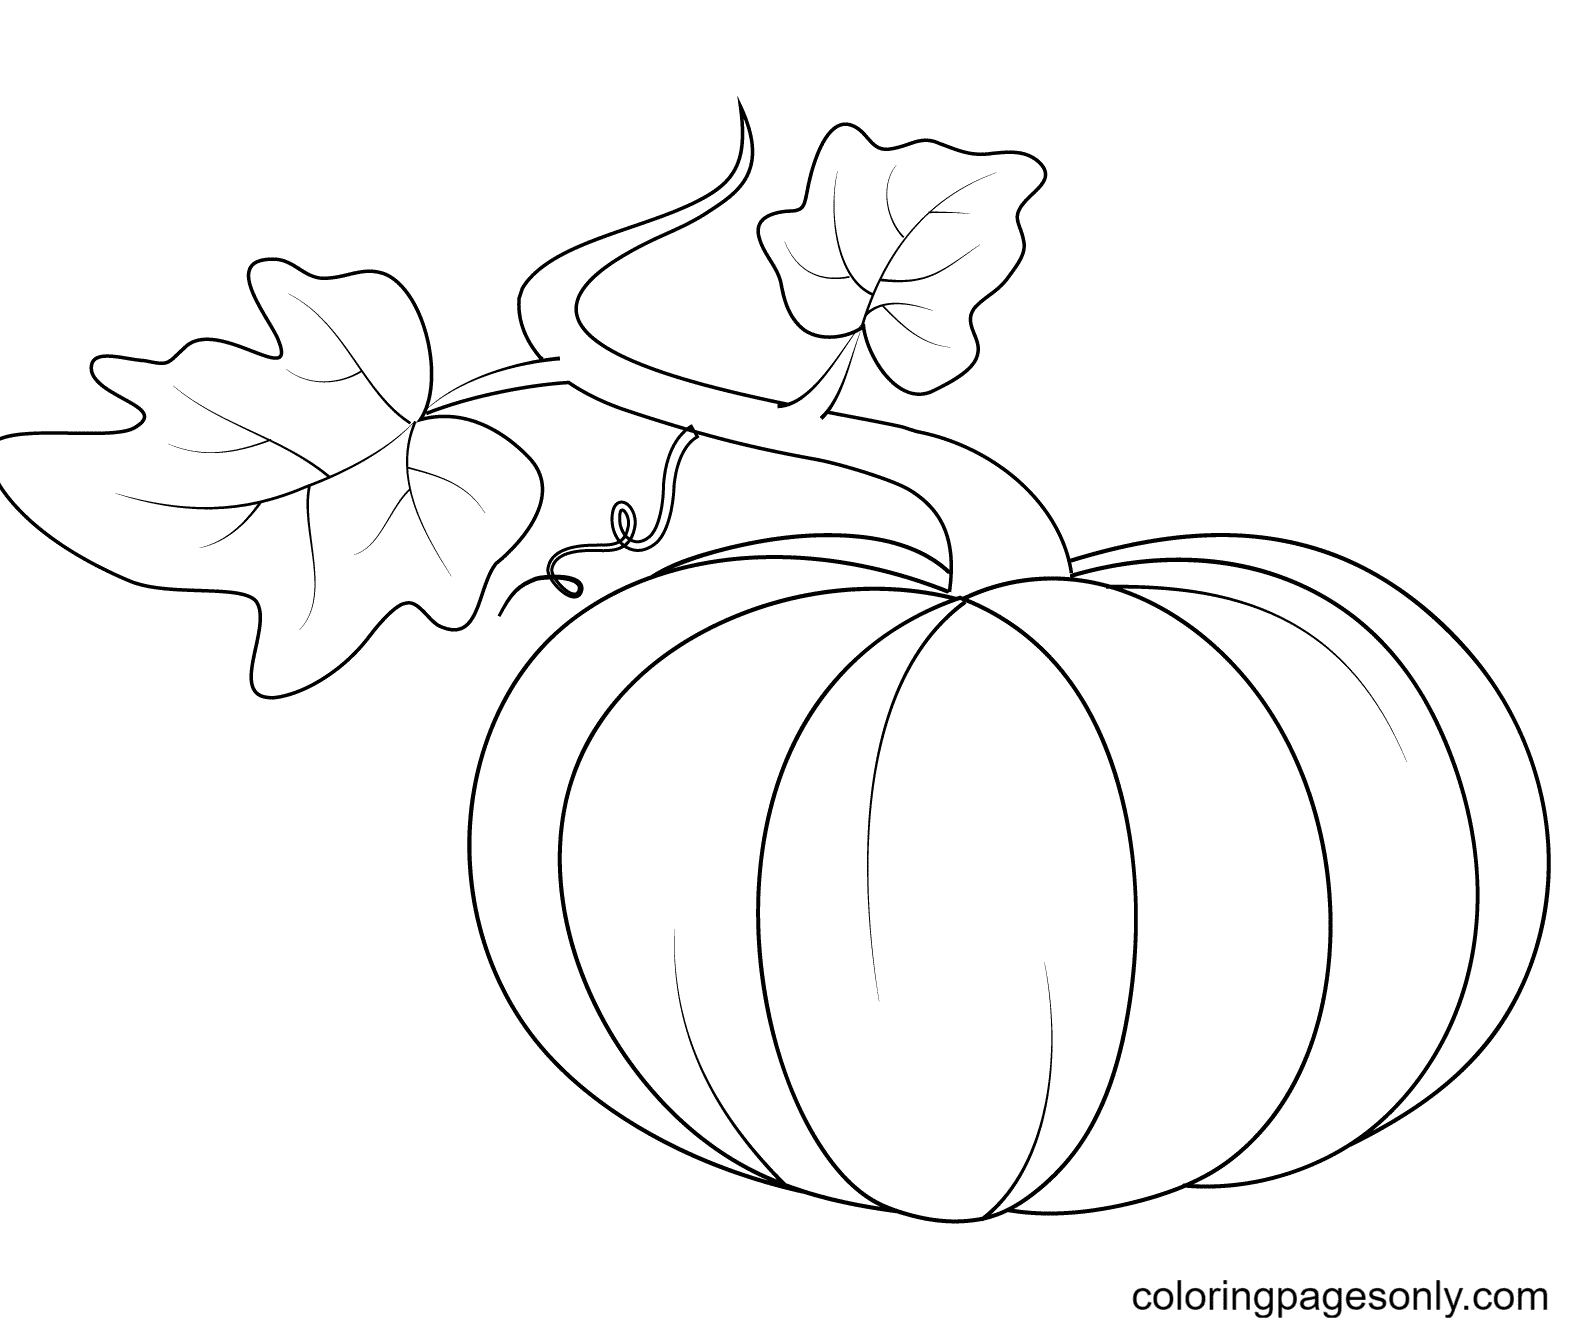 Pumpkin has two leaves Coloring Page